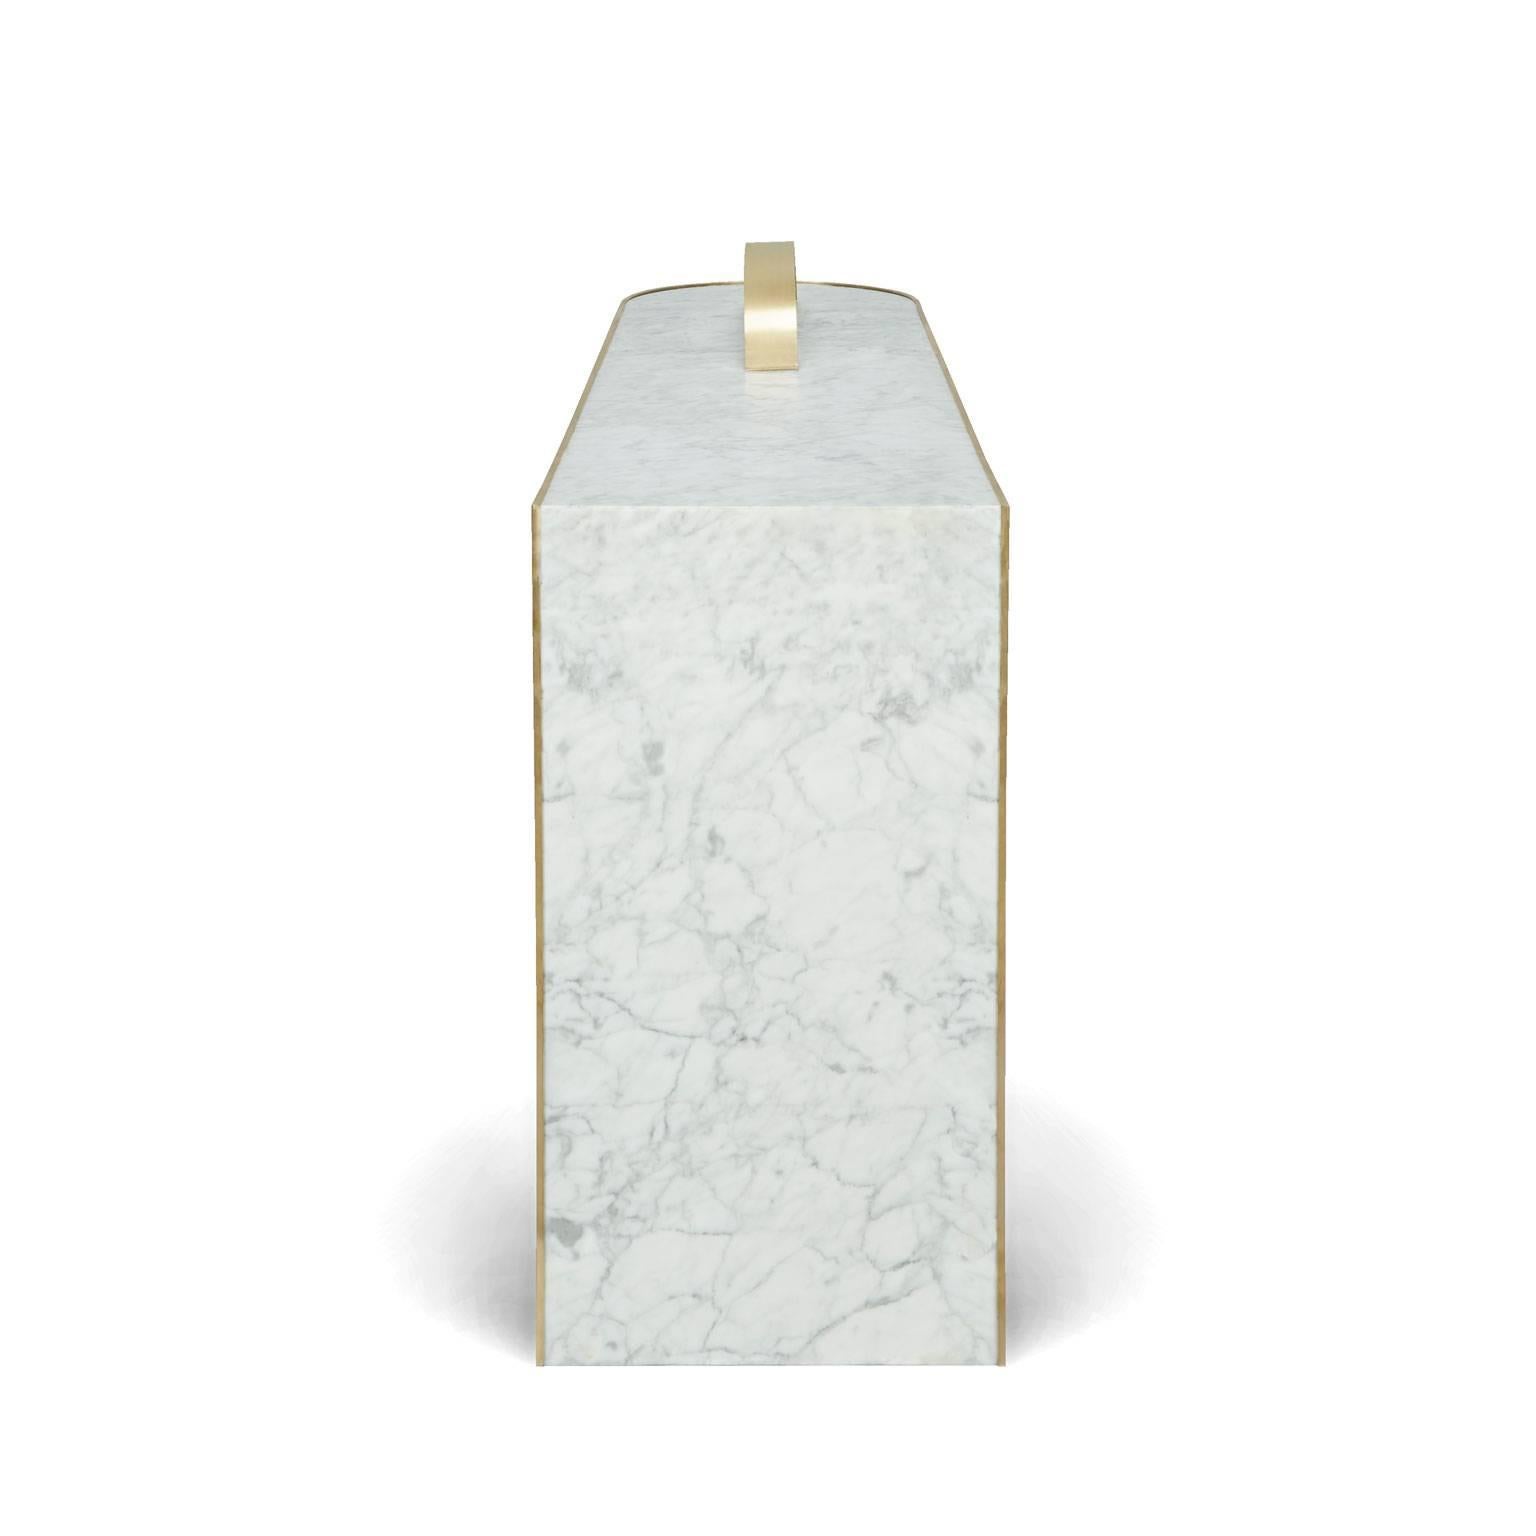 Modern The Collision Console Carrara Marble and Brushed Brass by Lara Bohinc